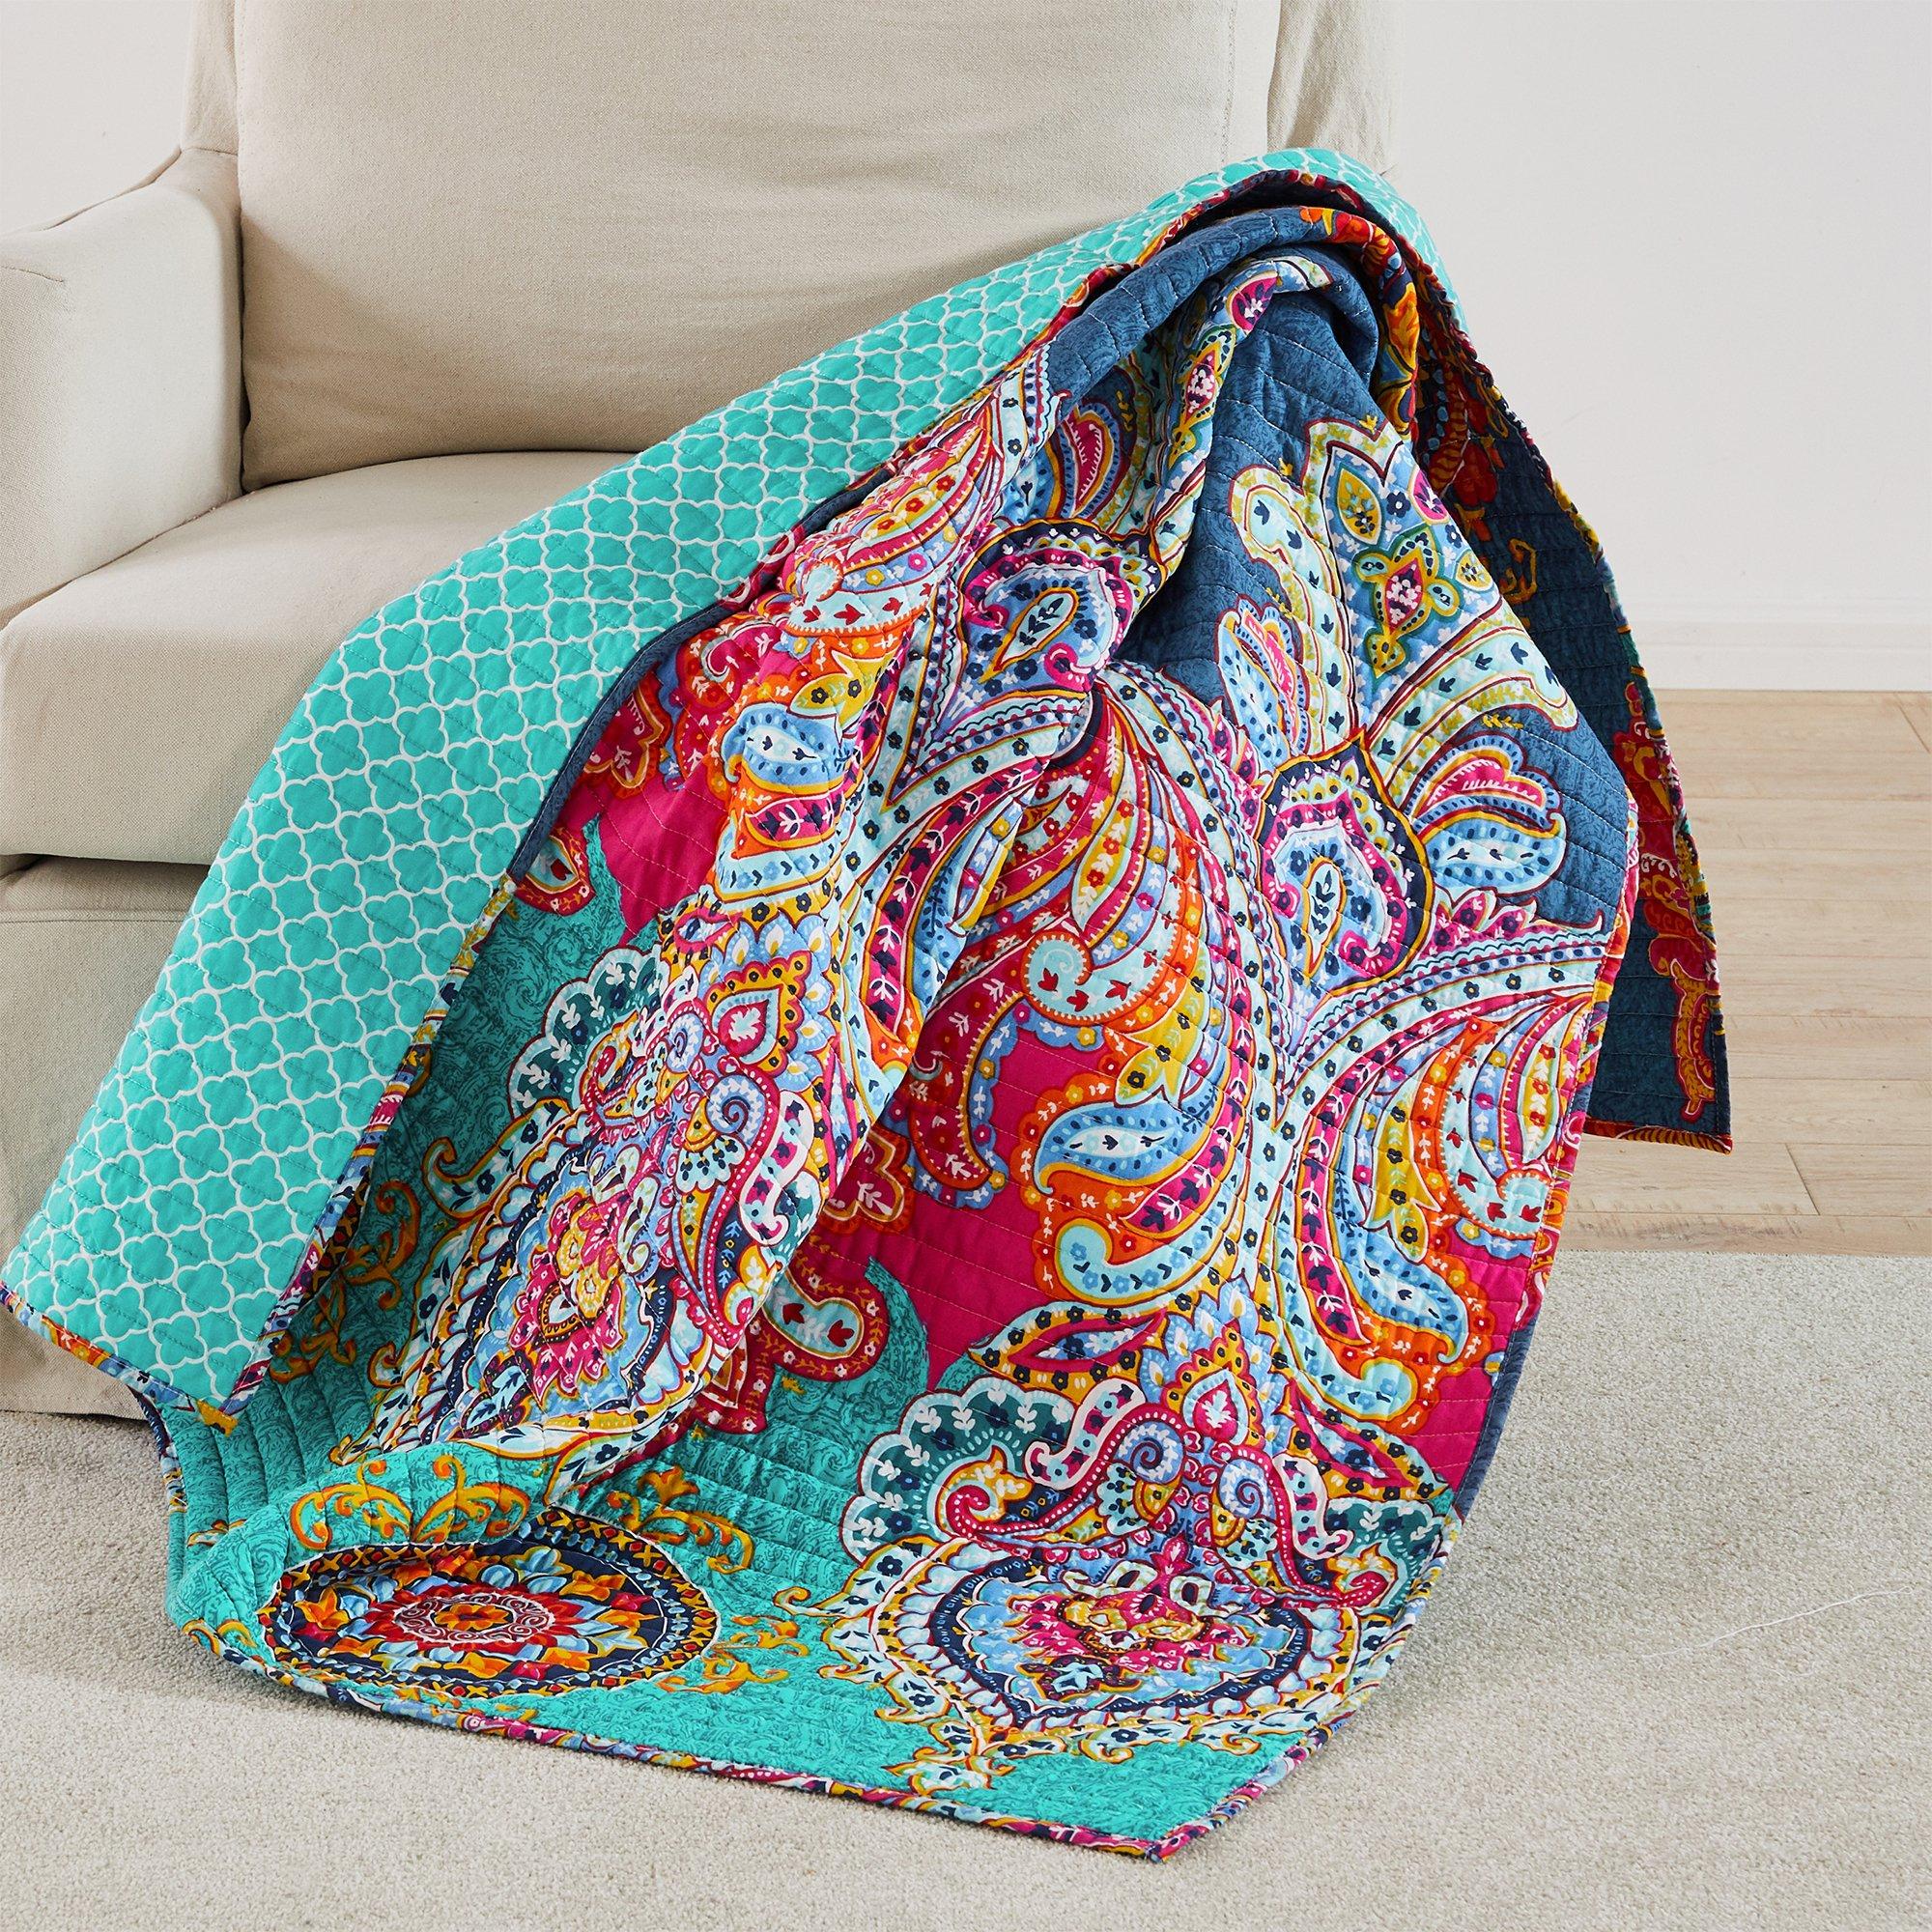 Levtex Home Fantasia Quilted Throw